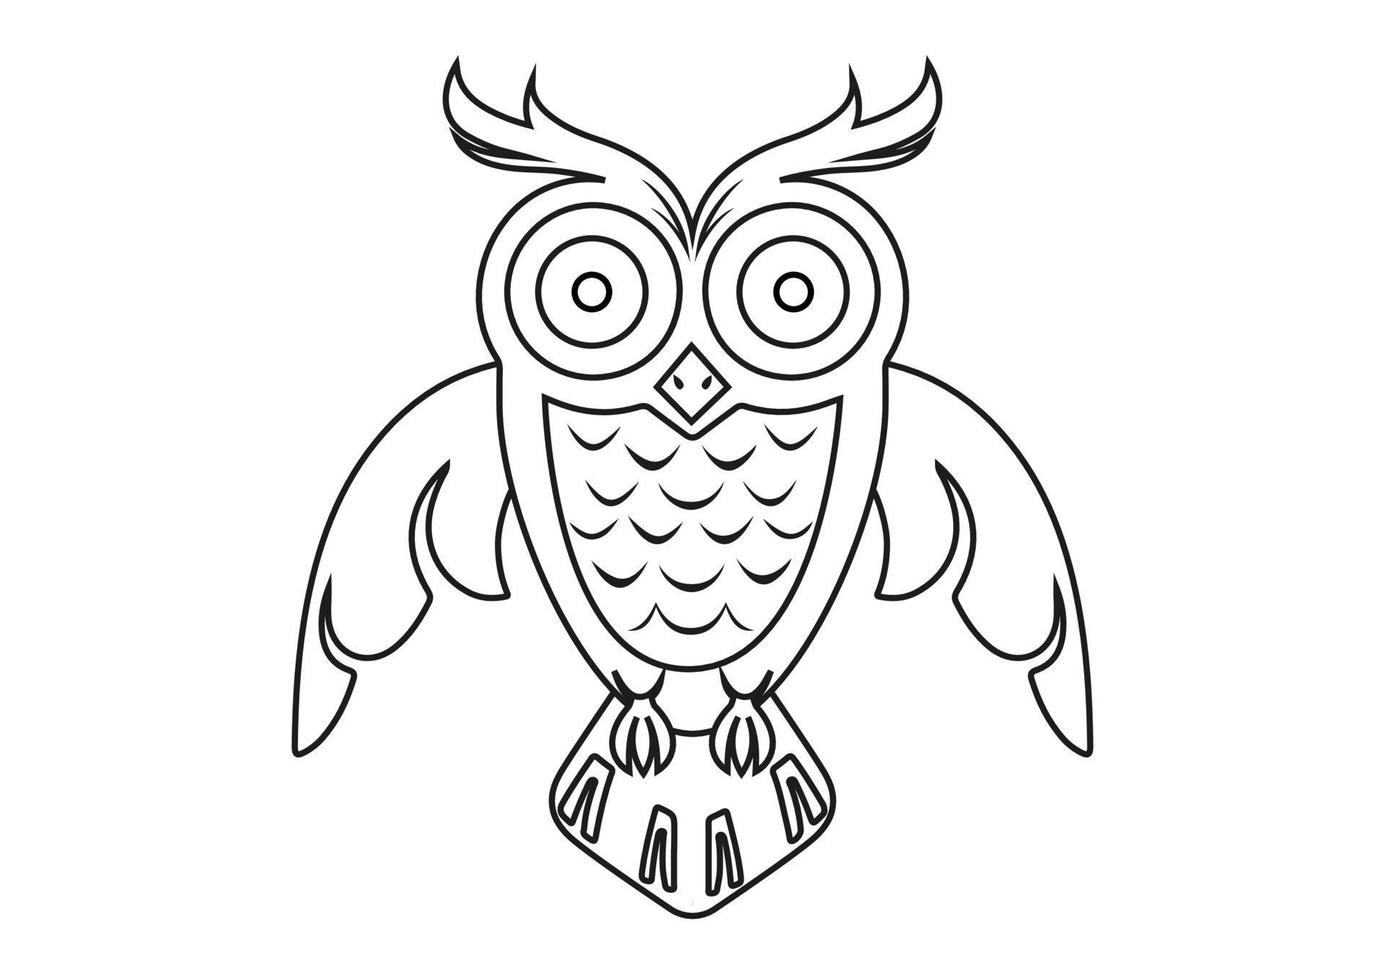 Black and White Owl. Coloring Page Of Cartoon Owl vector